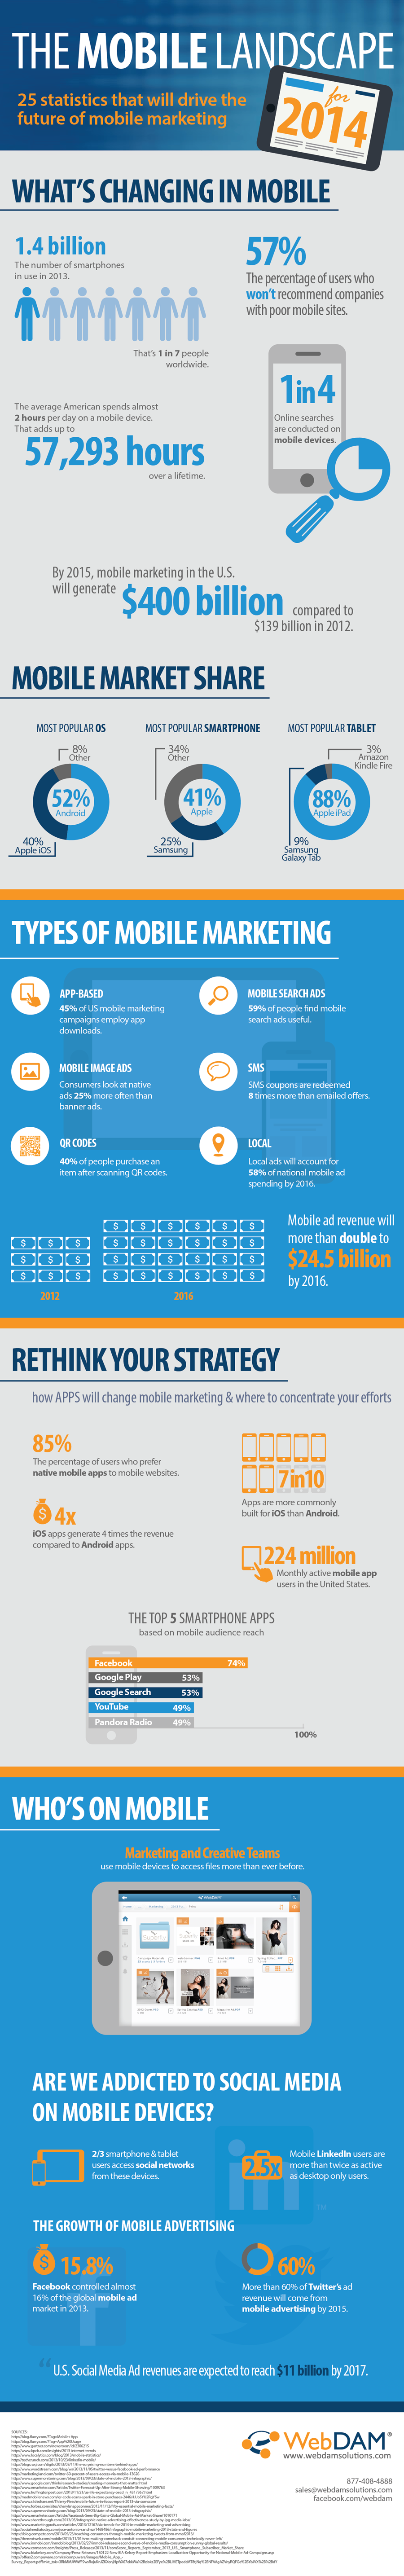 Mobile-Marketing-Infographic-20141